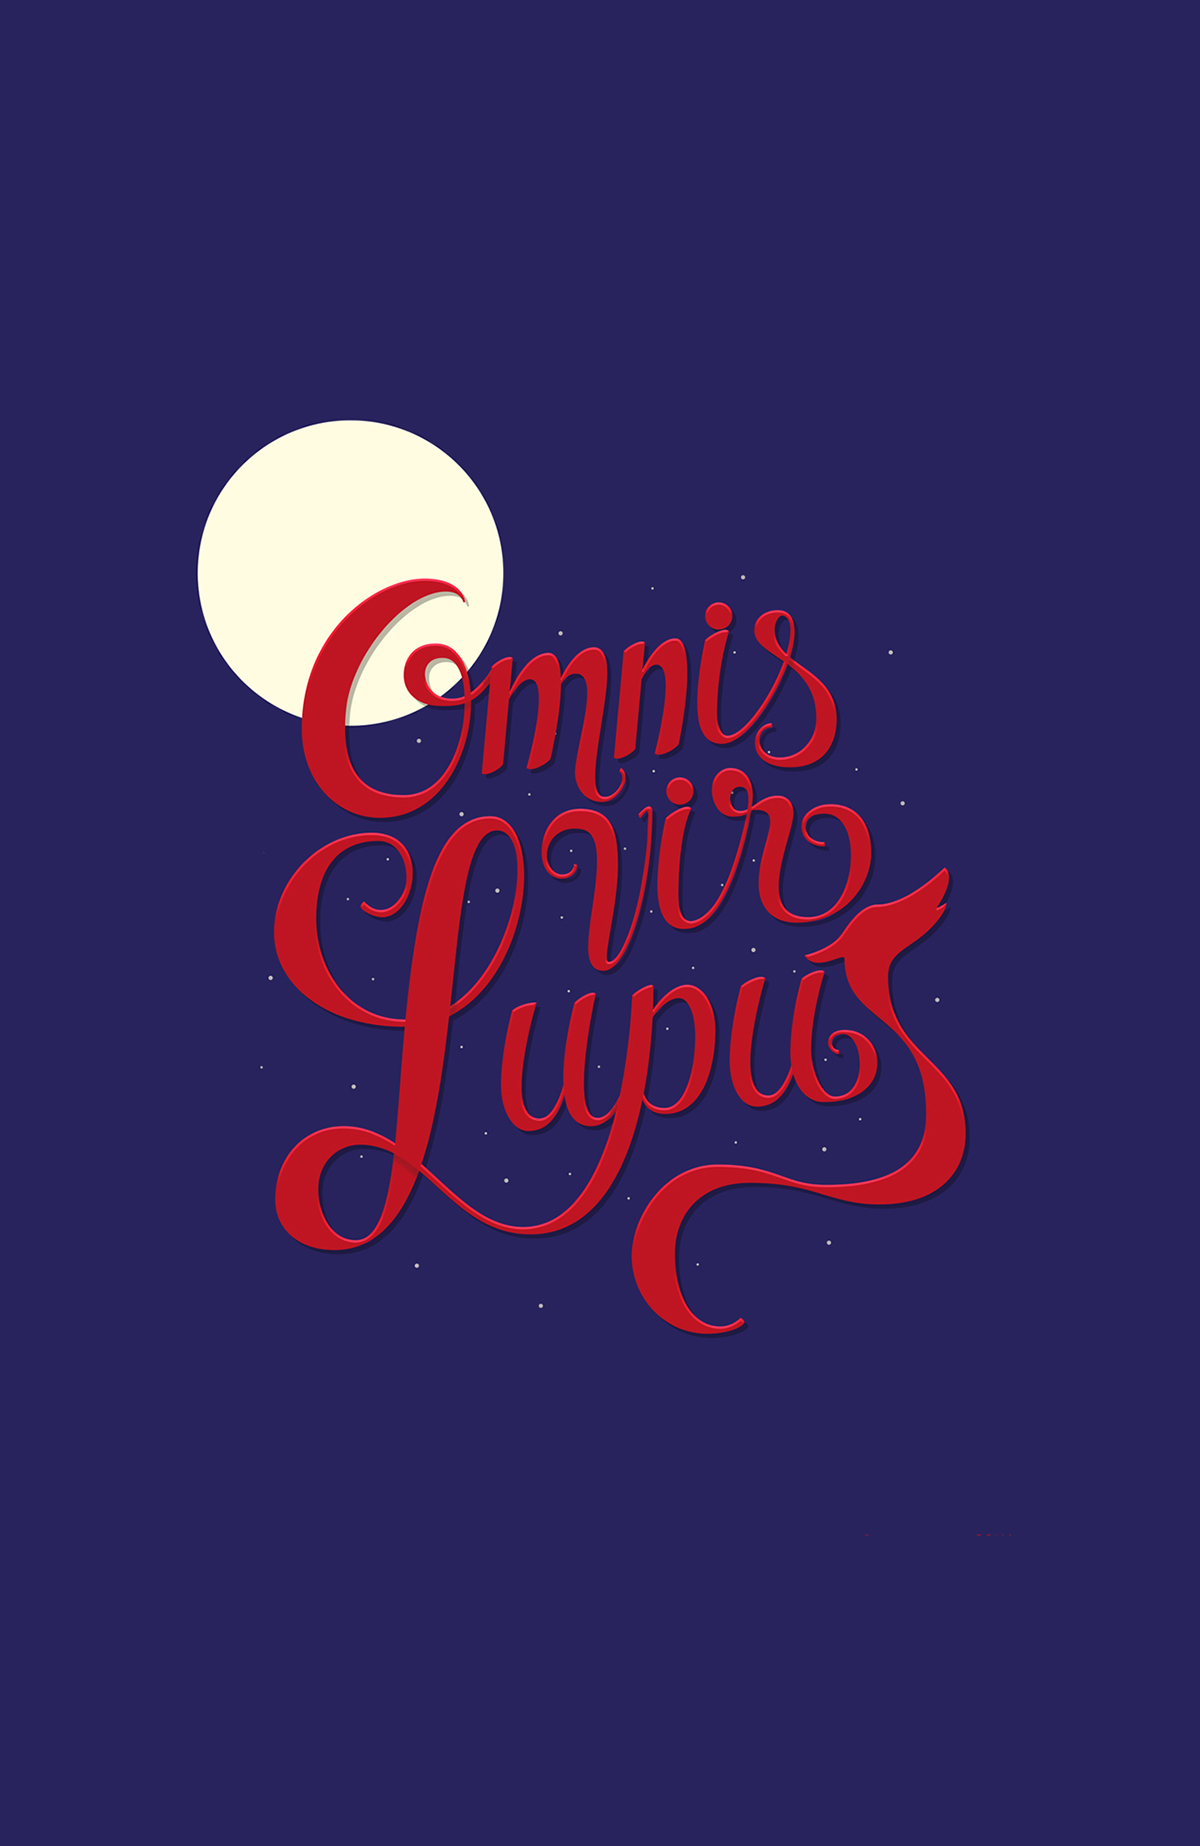 lettering book quote wolf howlers red rising moon